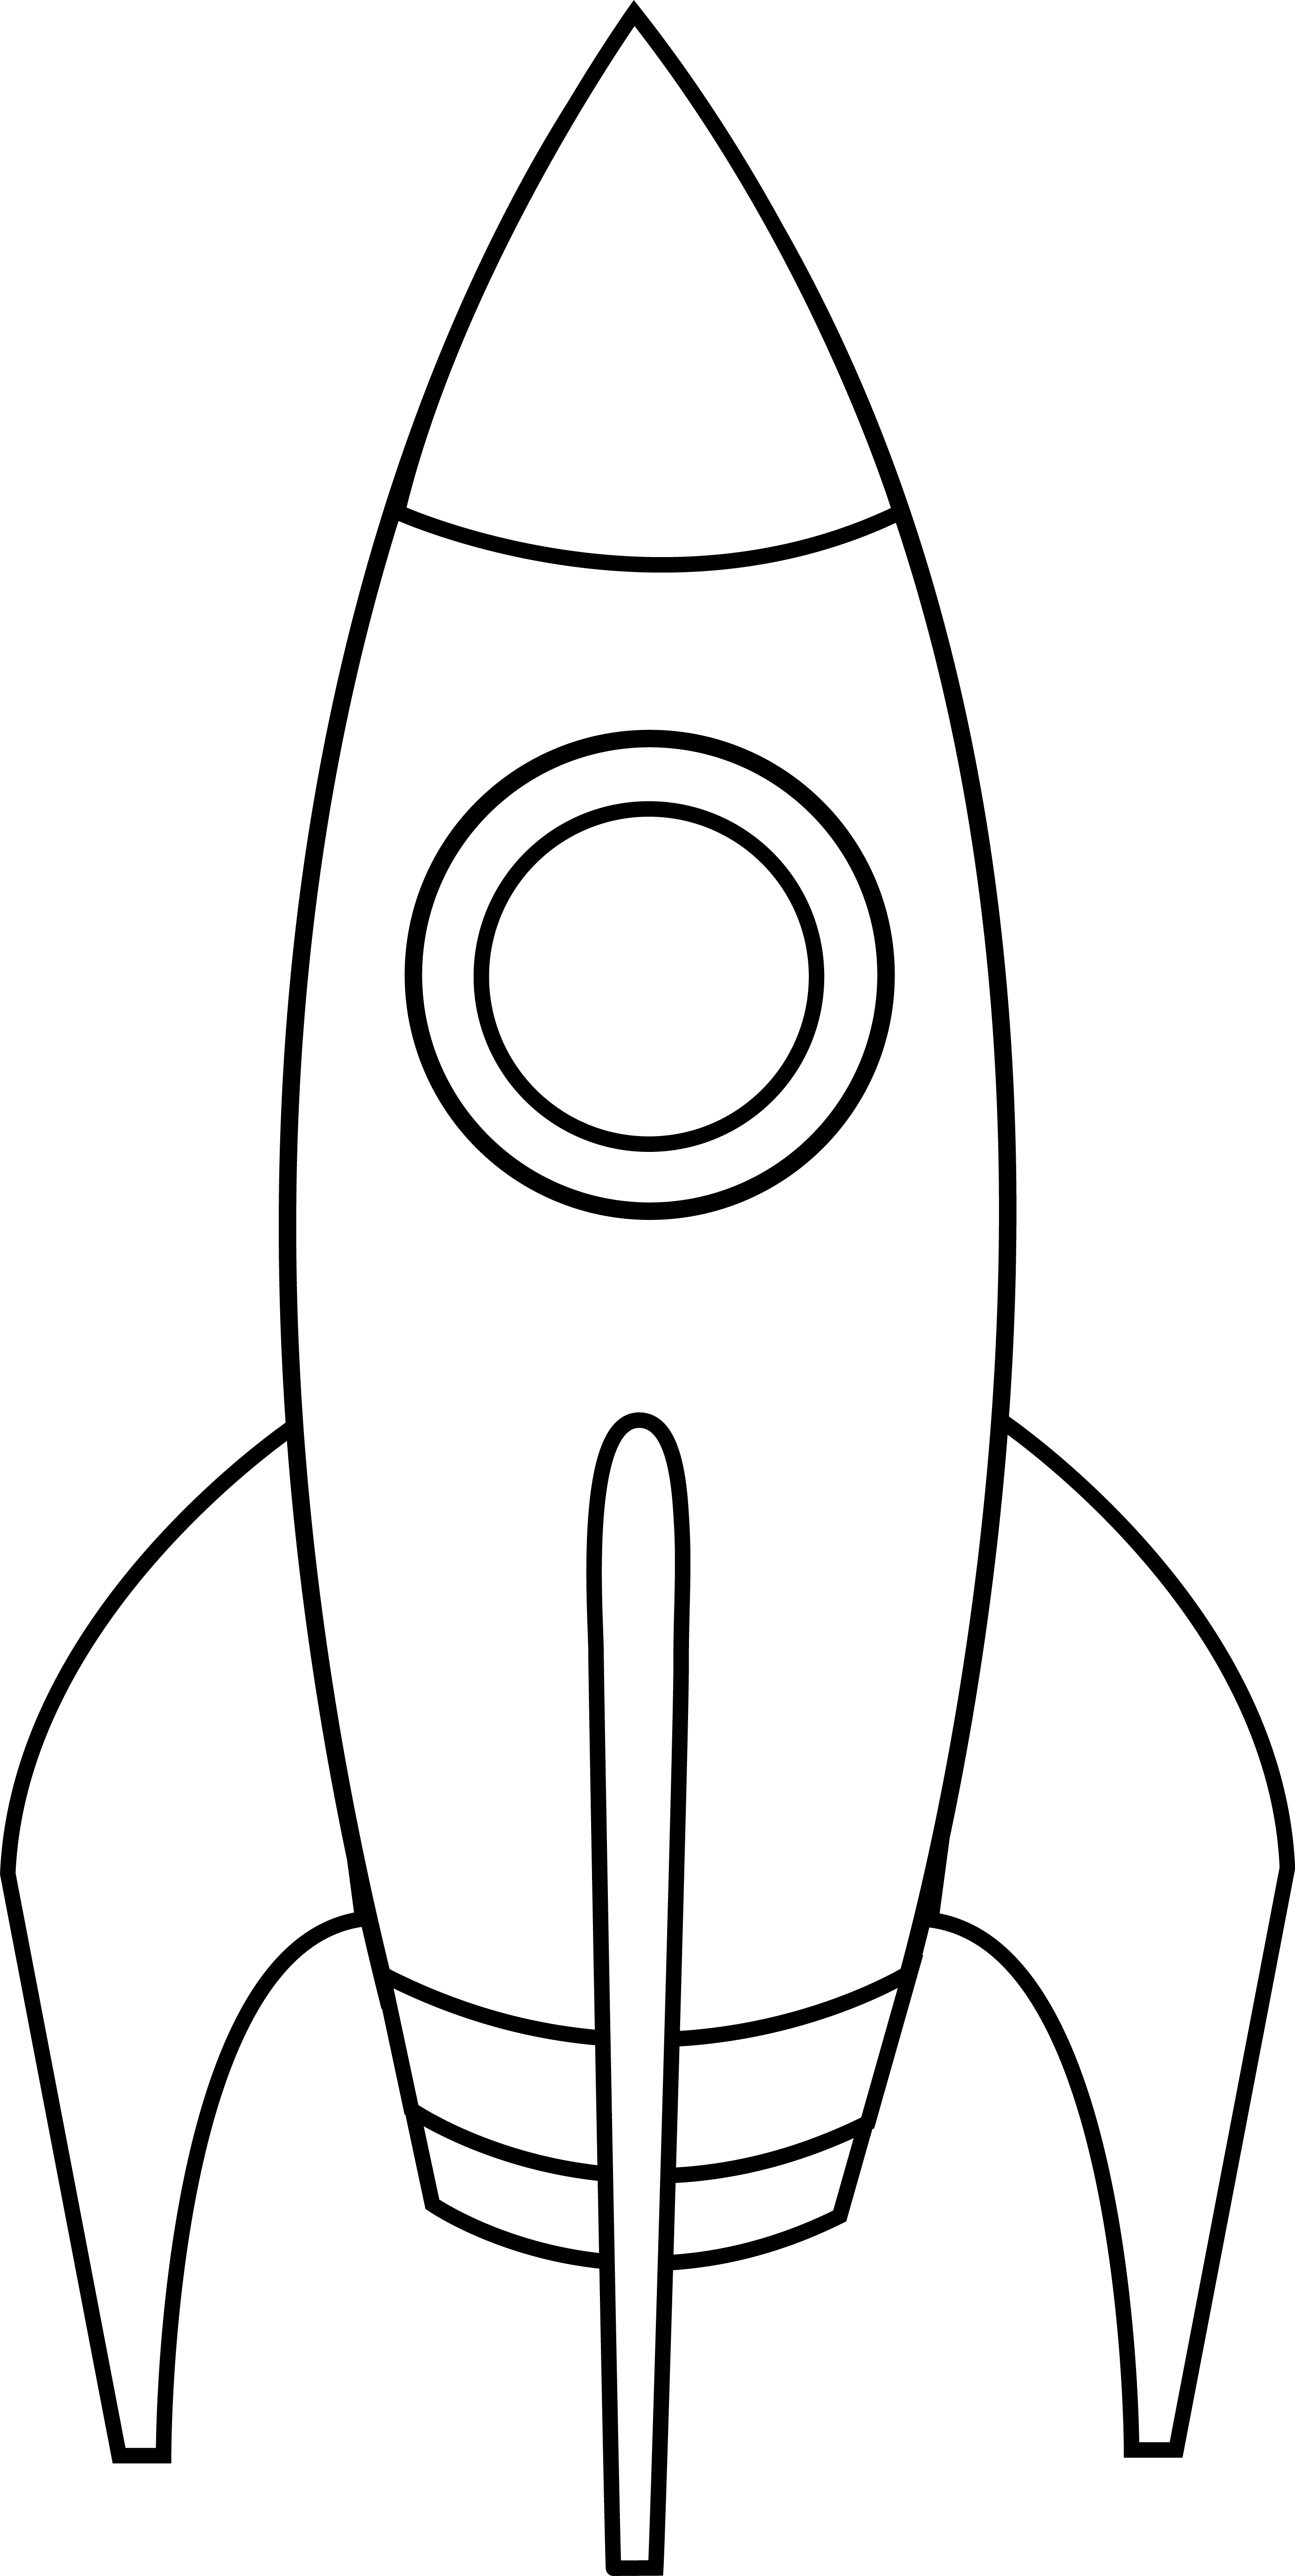 Spaceship clipart evil.  collection of simple